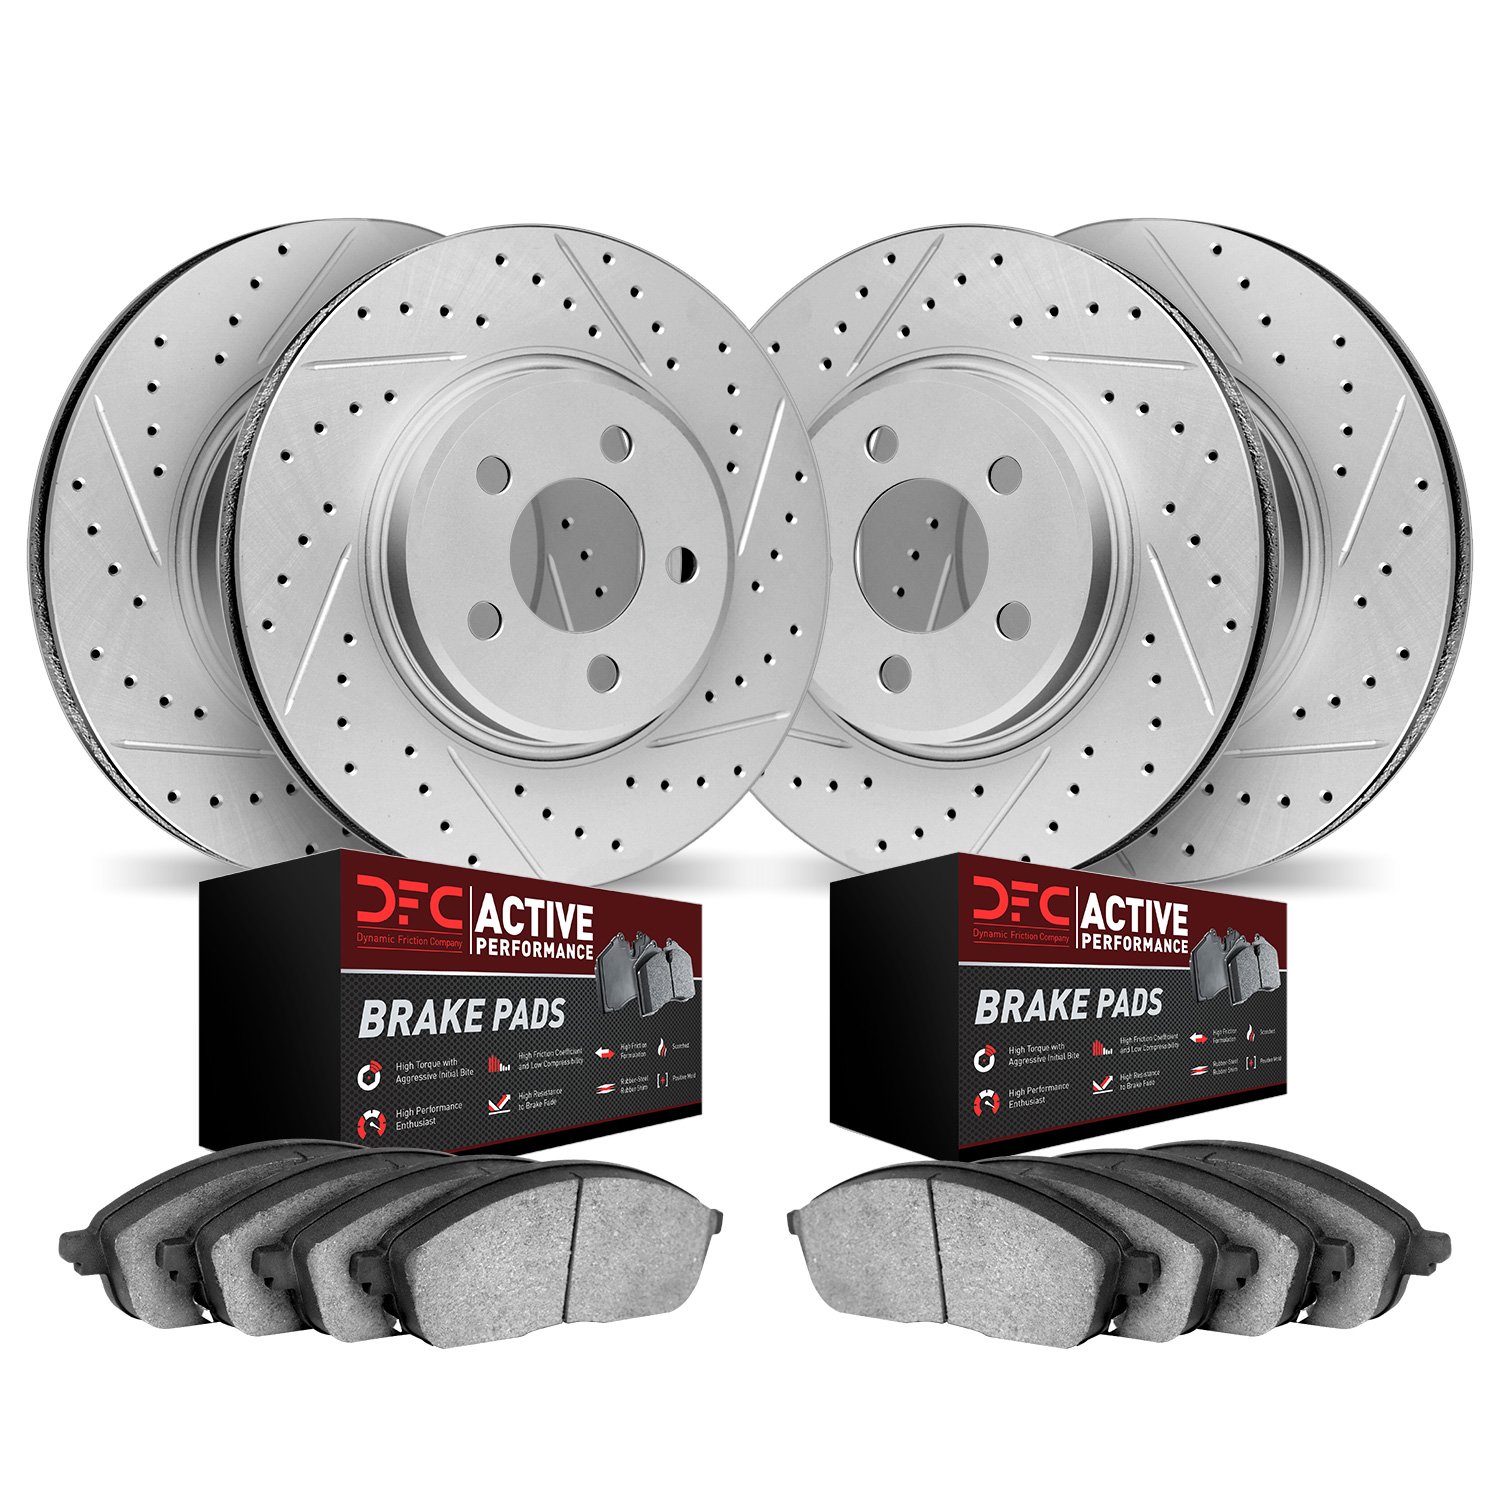 2704-02002 Geoperformance Drilled/Slotted Brake Rotors with Active Performance Pads Kit, 1969-1977 Porsche, Position: Front and